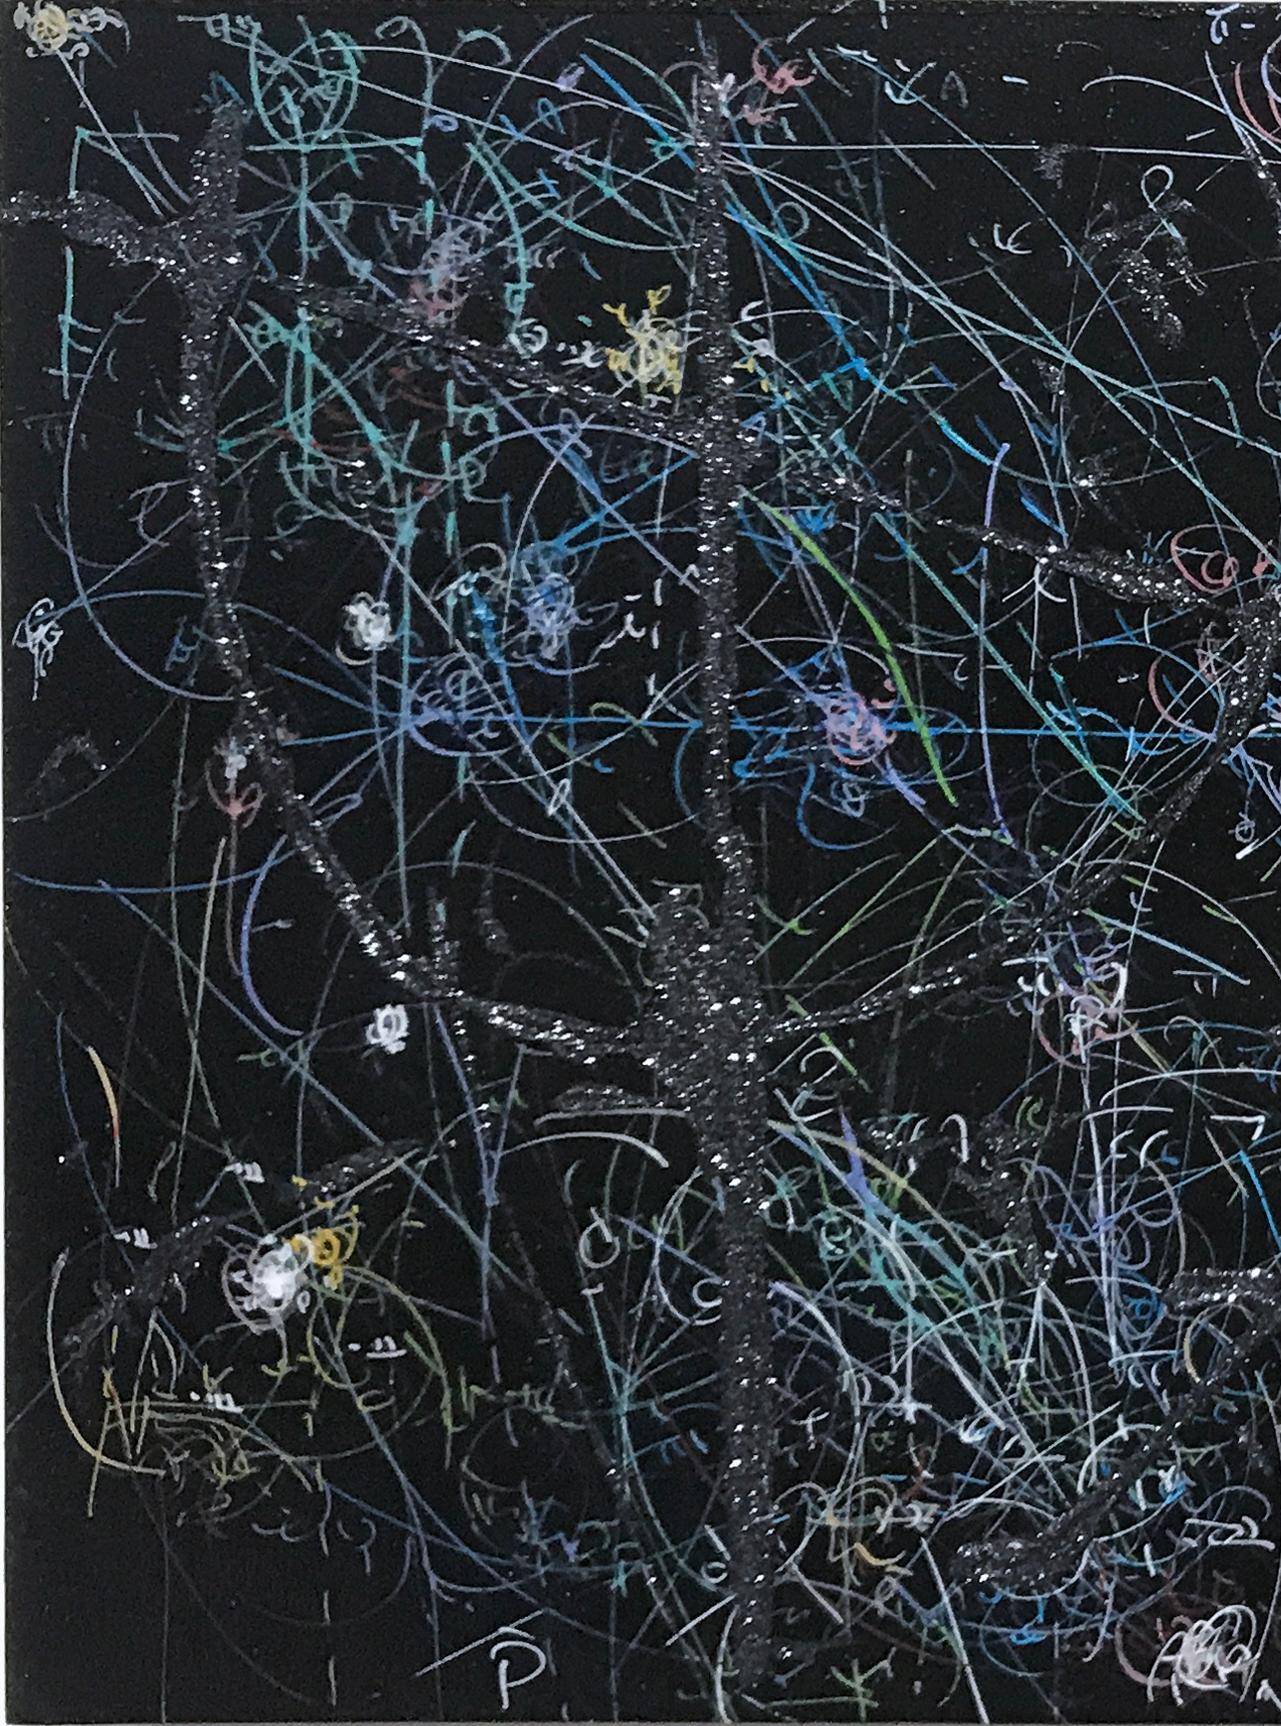 blow up 332 - the long goodbye - subatomic decay patterns and dark matter in the - Painting by Kysa Johnson